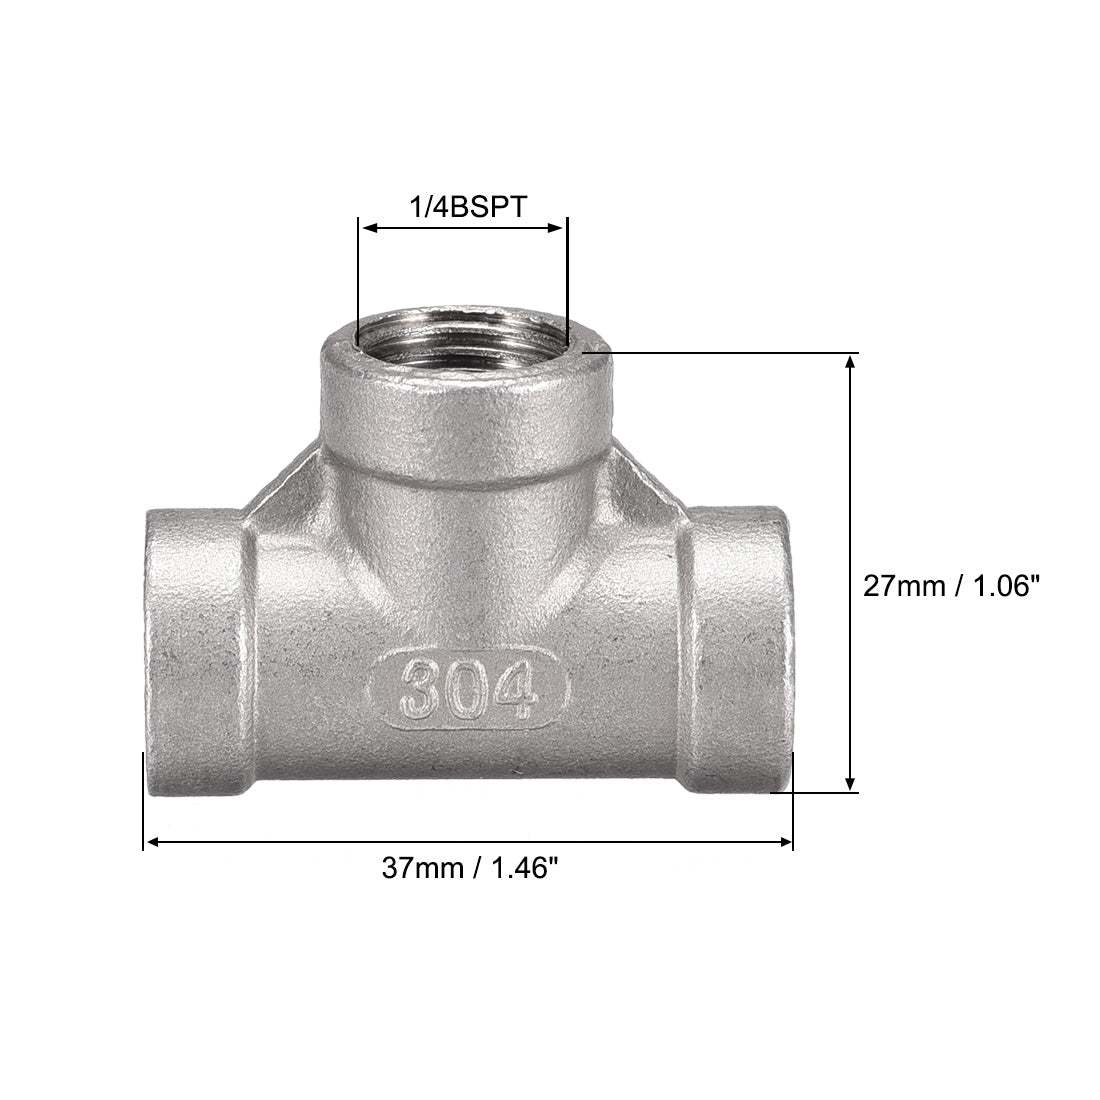 Uxcell Uxcell Stainless Steel 304 Cast  Pipe Fitting 1/8BSPT Female Thread Class 150 Tee Shaped Connector Coupler